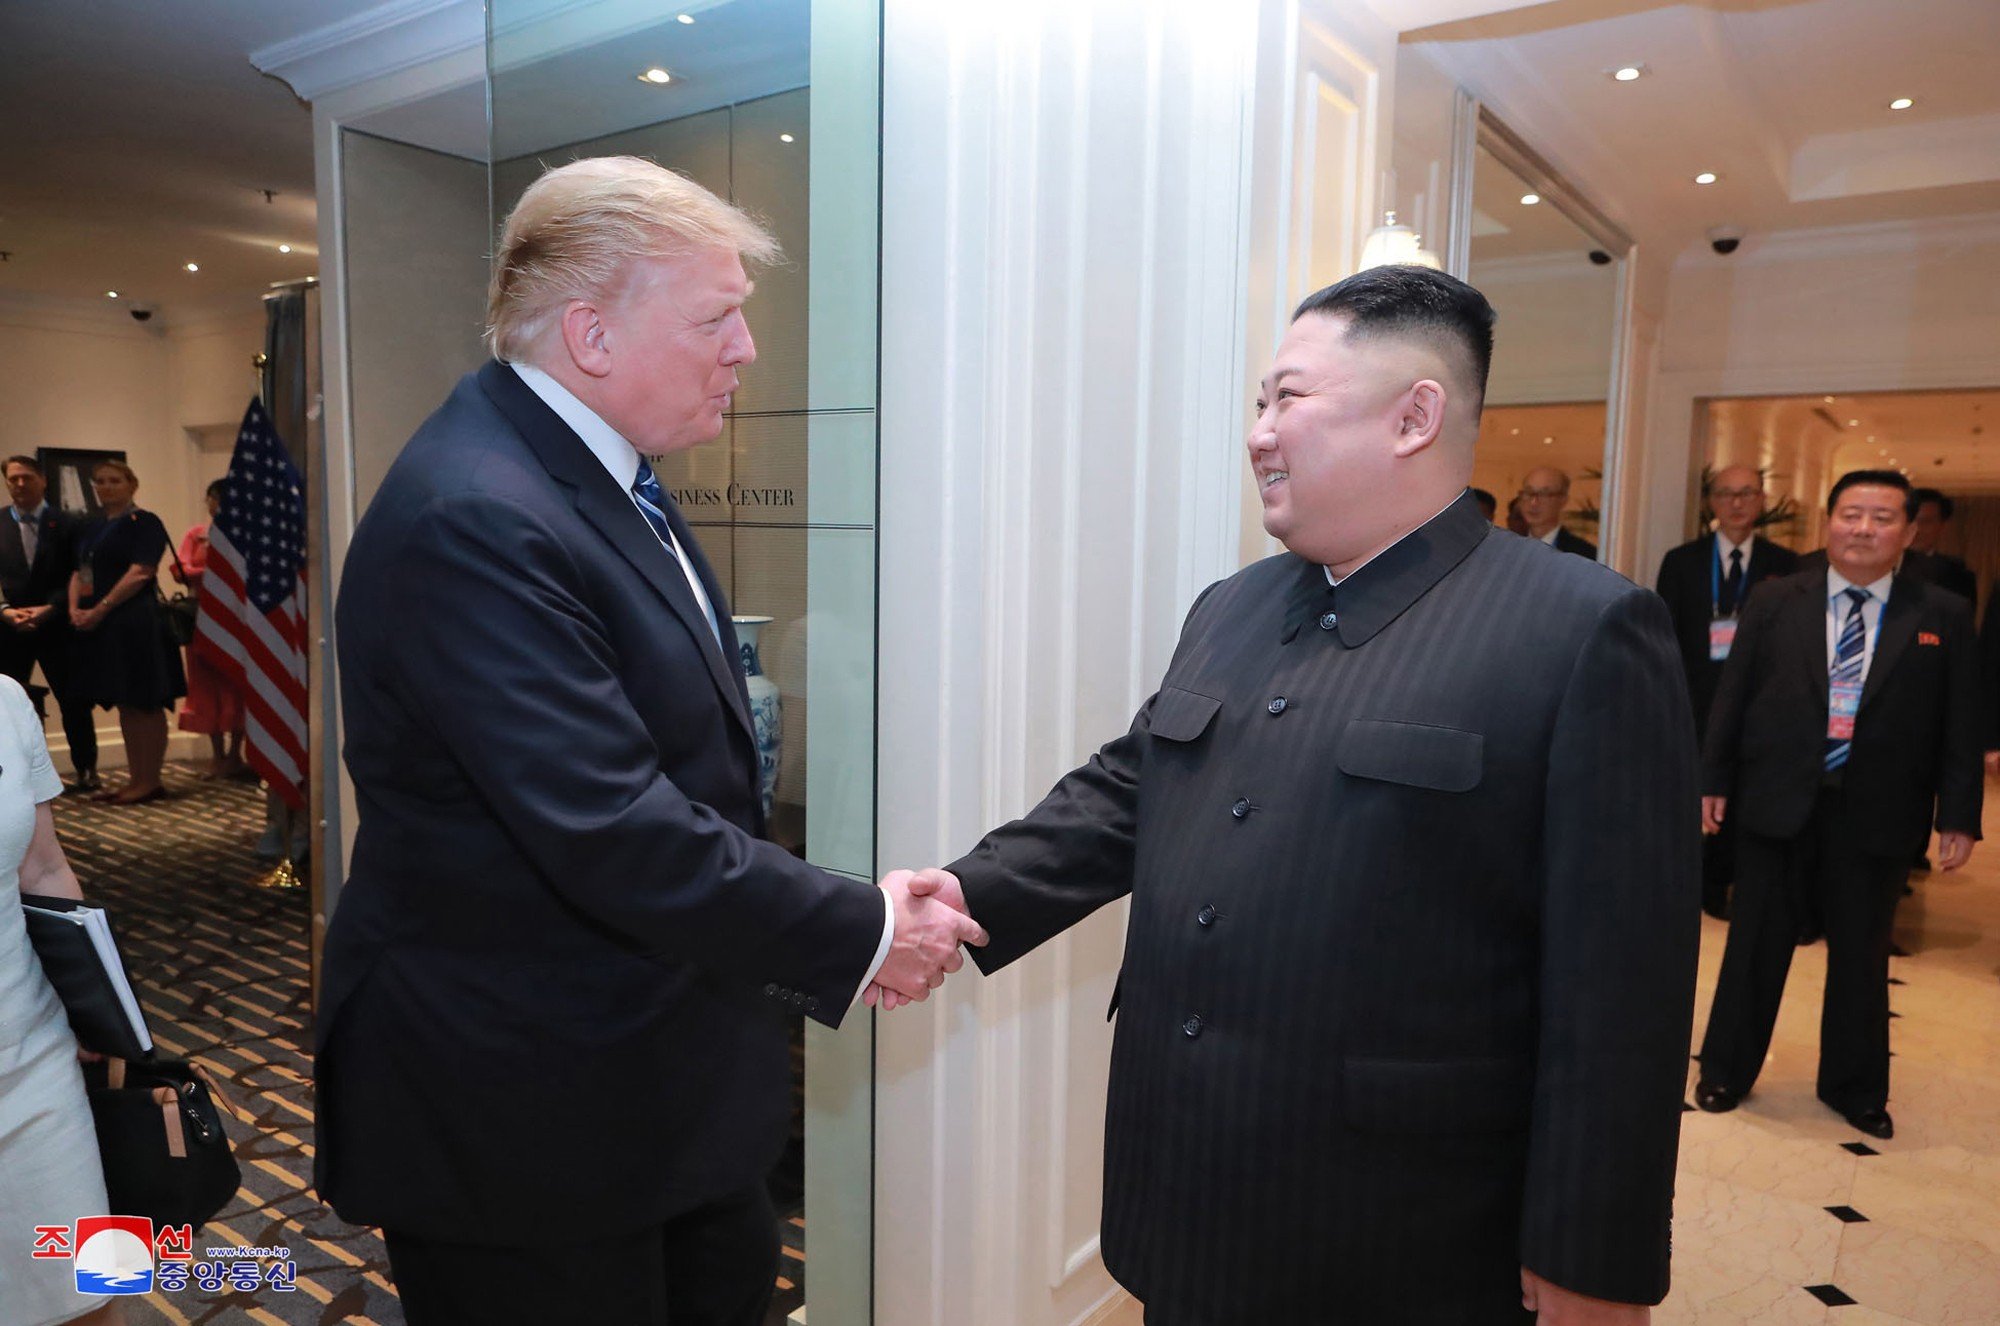 US President Donald Trump and North Korean leader Kim Jong-un in Hanoi, Vietnam, on February 28. The meeting failed to advance negotiations to end the nuclear stand-off, with North Korea now refusing all contact with the US administration. Photo: AP